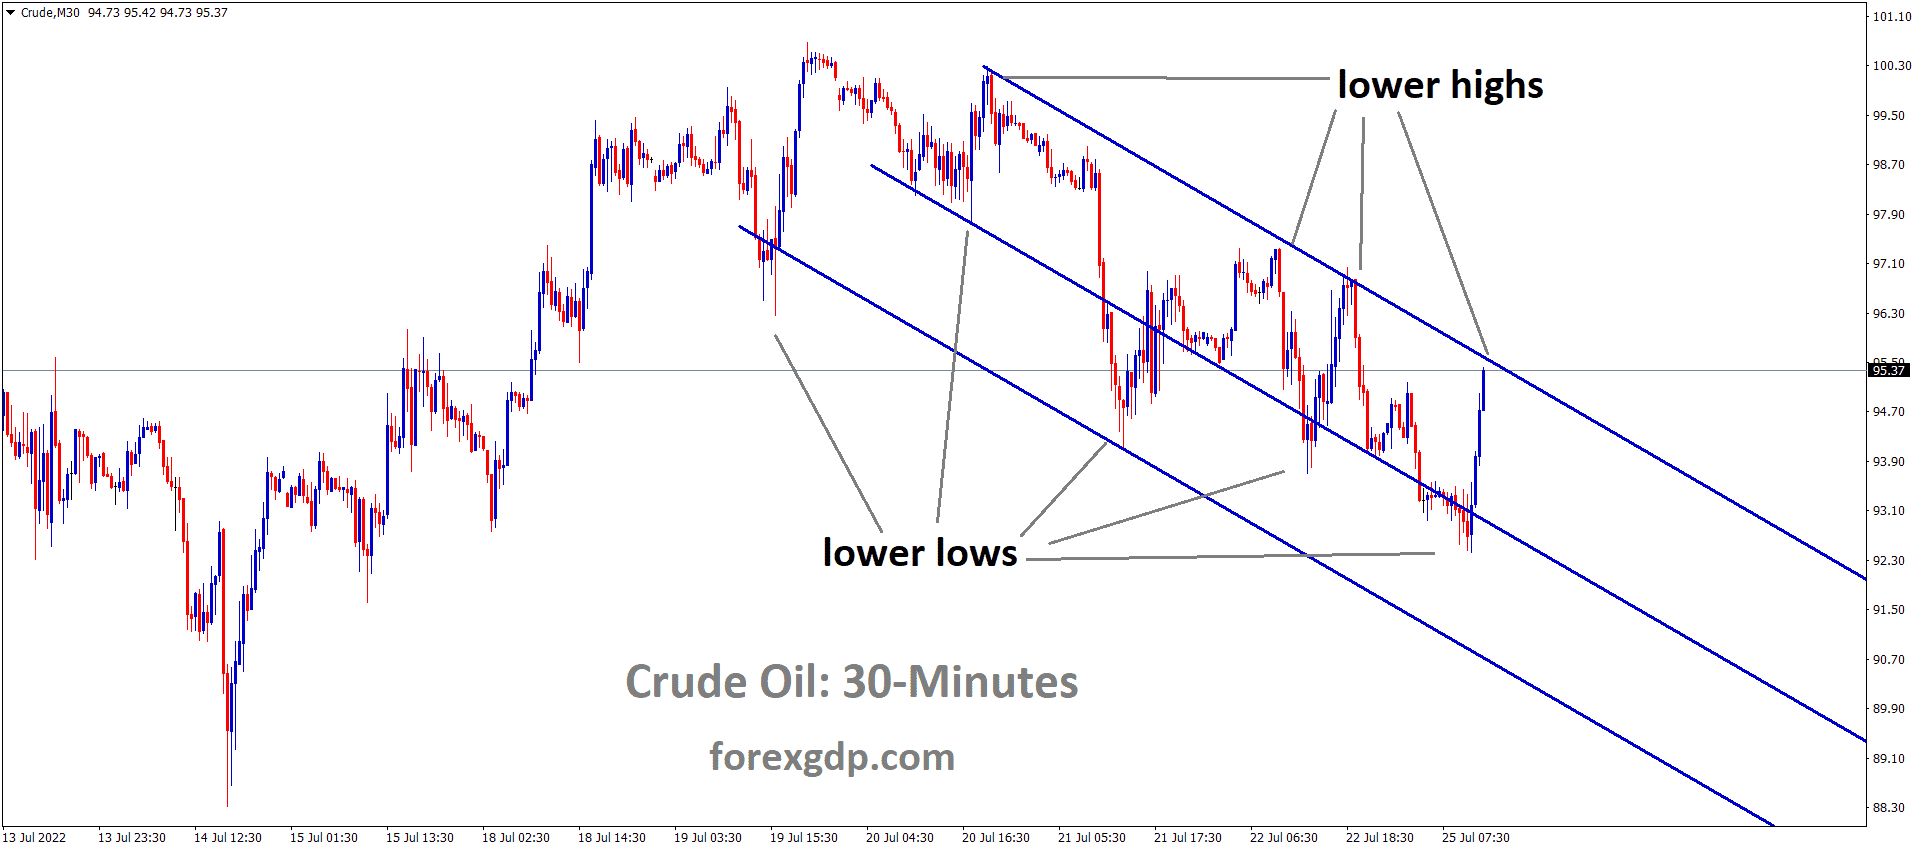 Crude Oil is moving in the Descending channel and the Market has reached the Lower high area of the channel 1